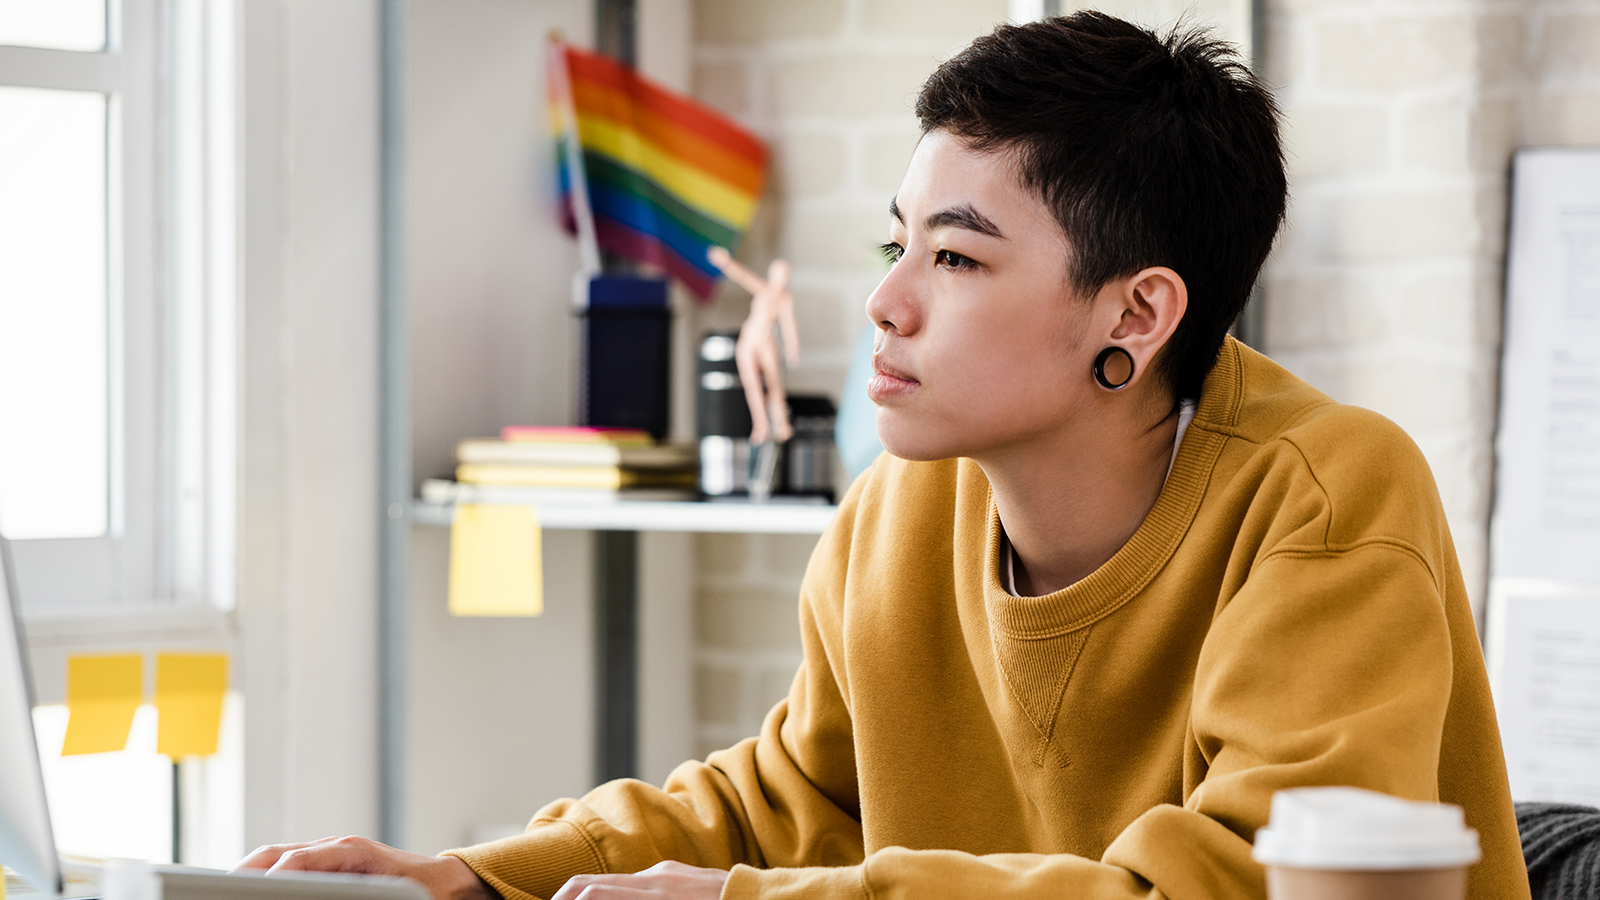 5 ways to make your workplace more LGBTQ+ inclusive